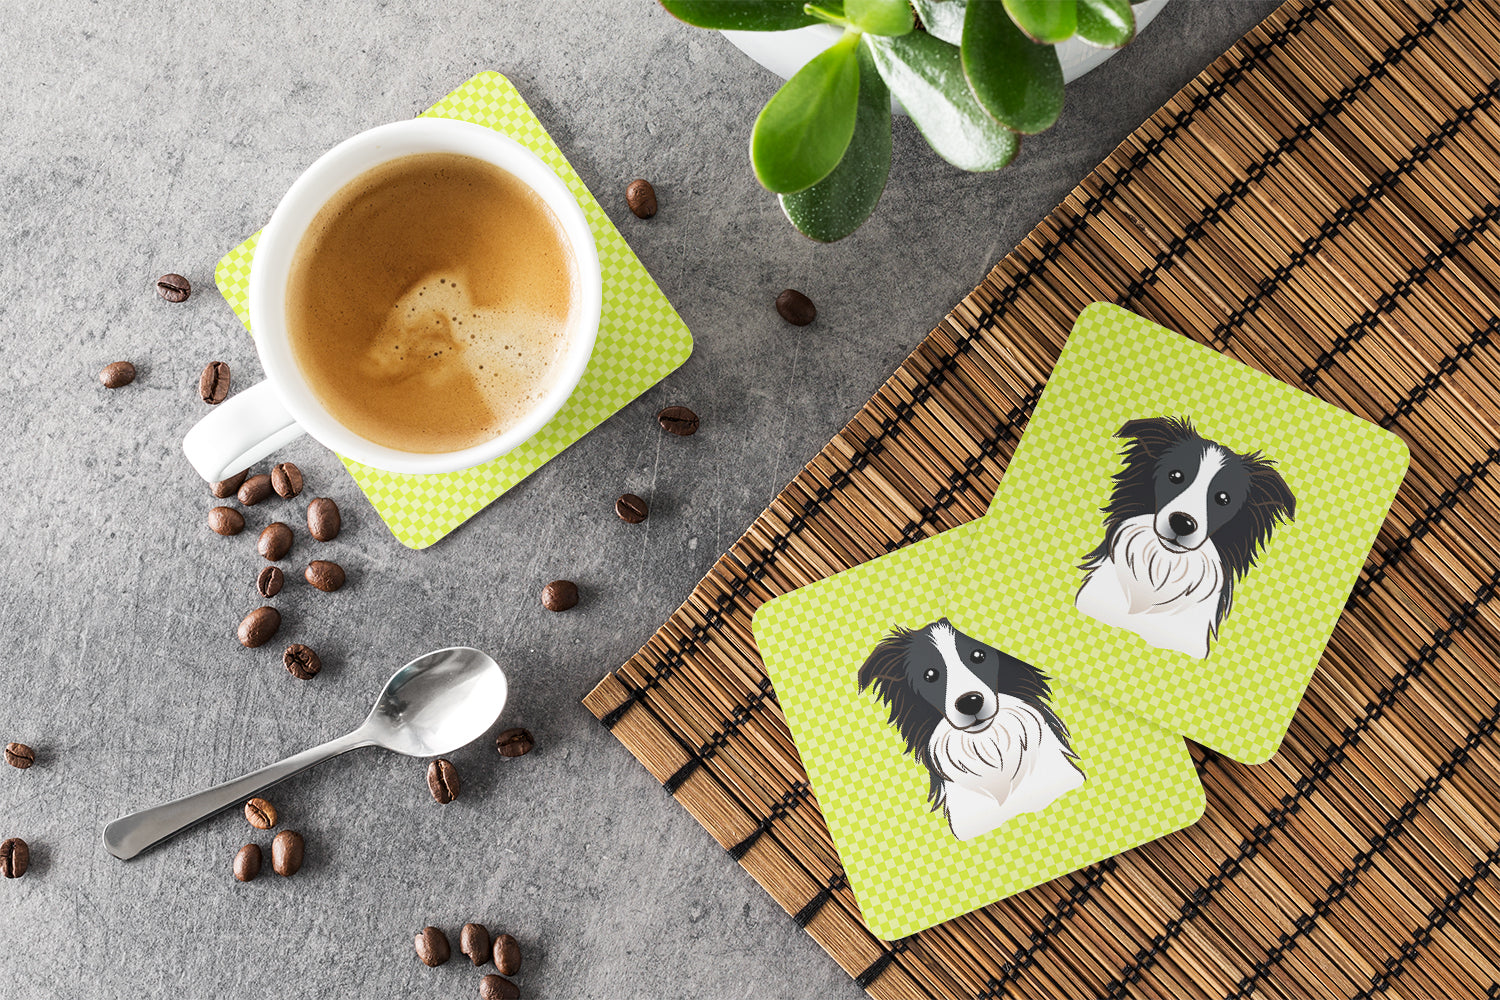 Set of 4 Checkerboard Lime Green Border Collie Foam Coasters BB1303FC - the-store.com